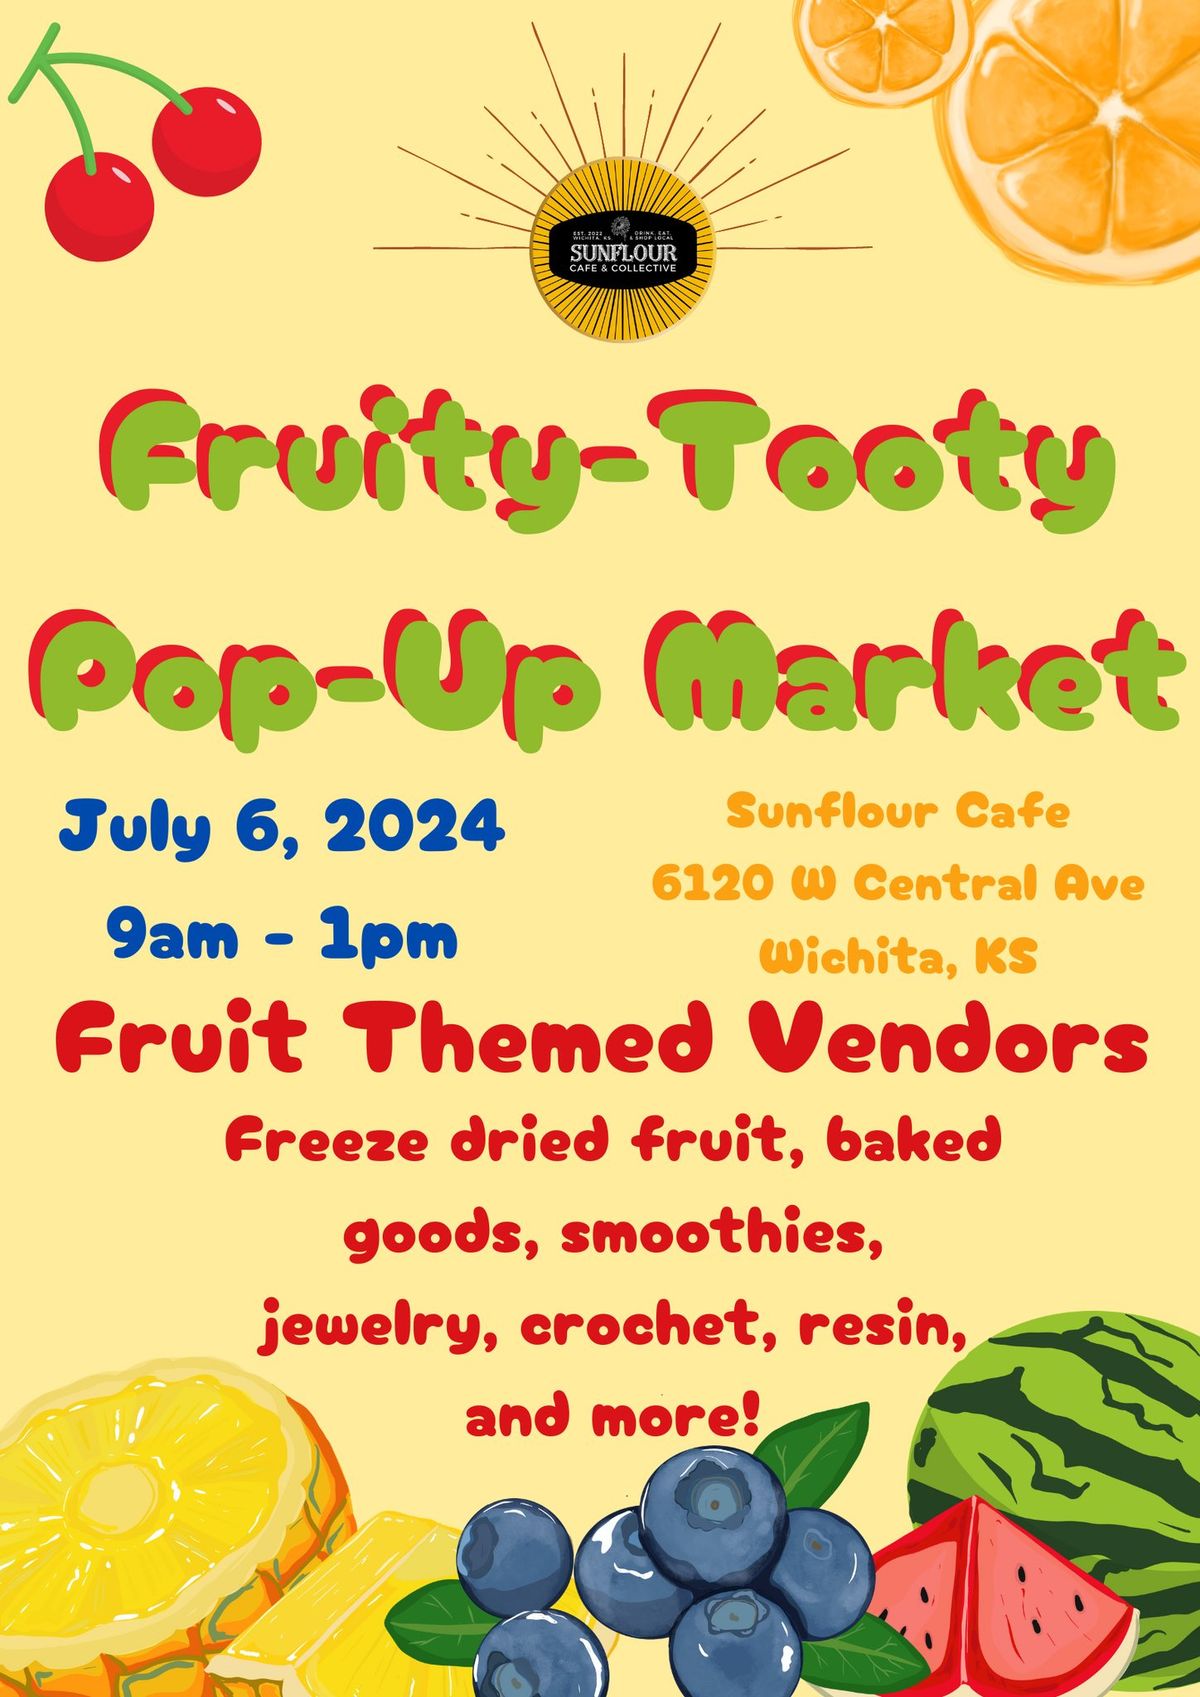 All Things Fruity-Tooty Pop-Up Market